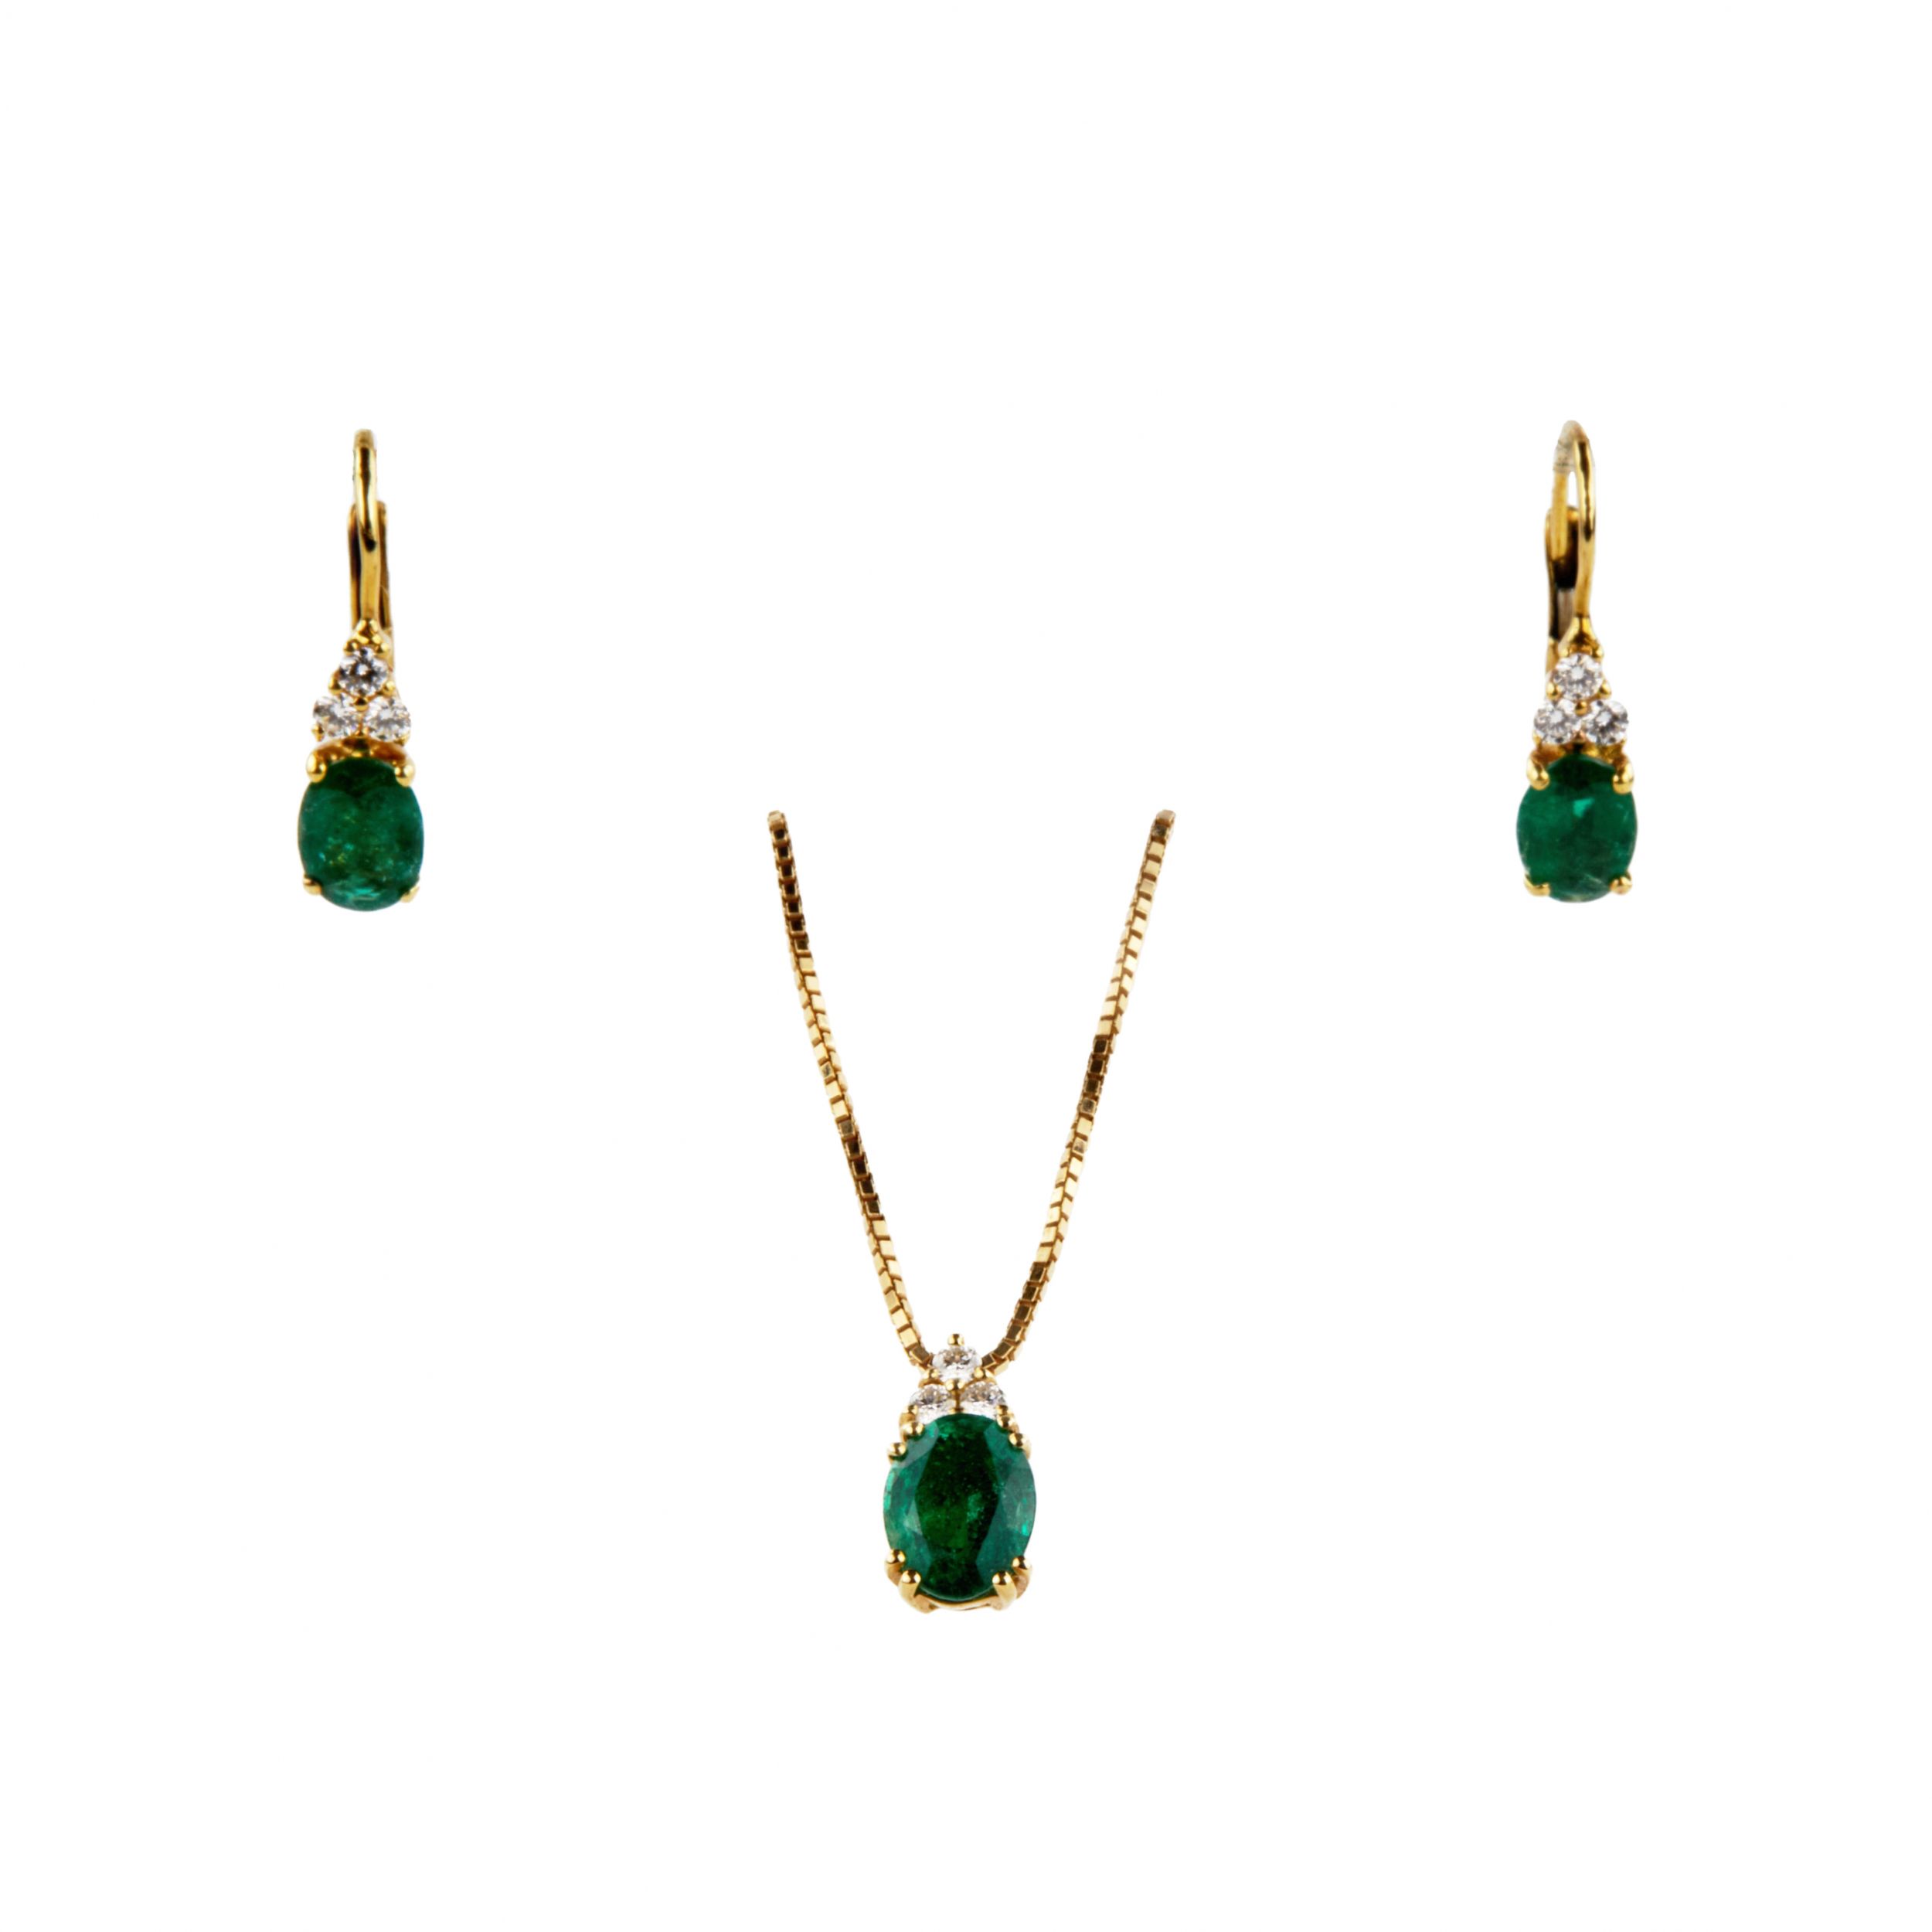 Giorgio-Visconti-Gold-18K-pendant-and-earrings-with-emeralds-and-diamonds-